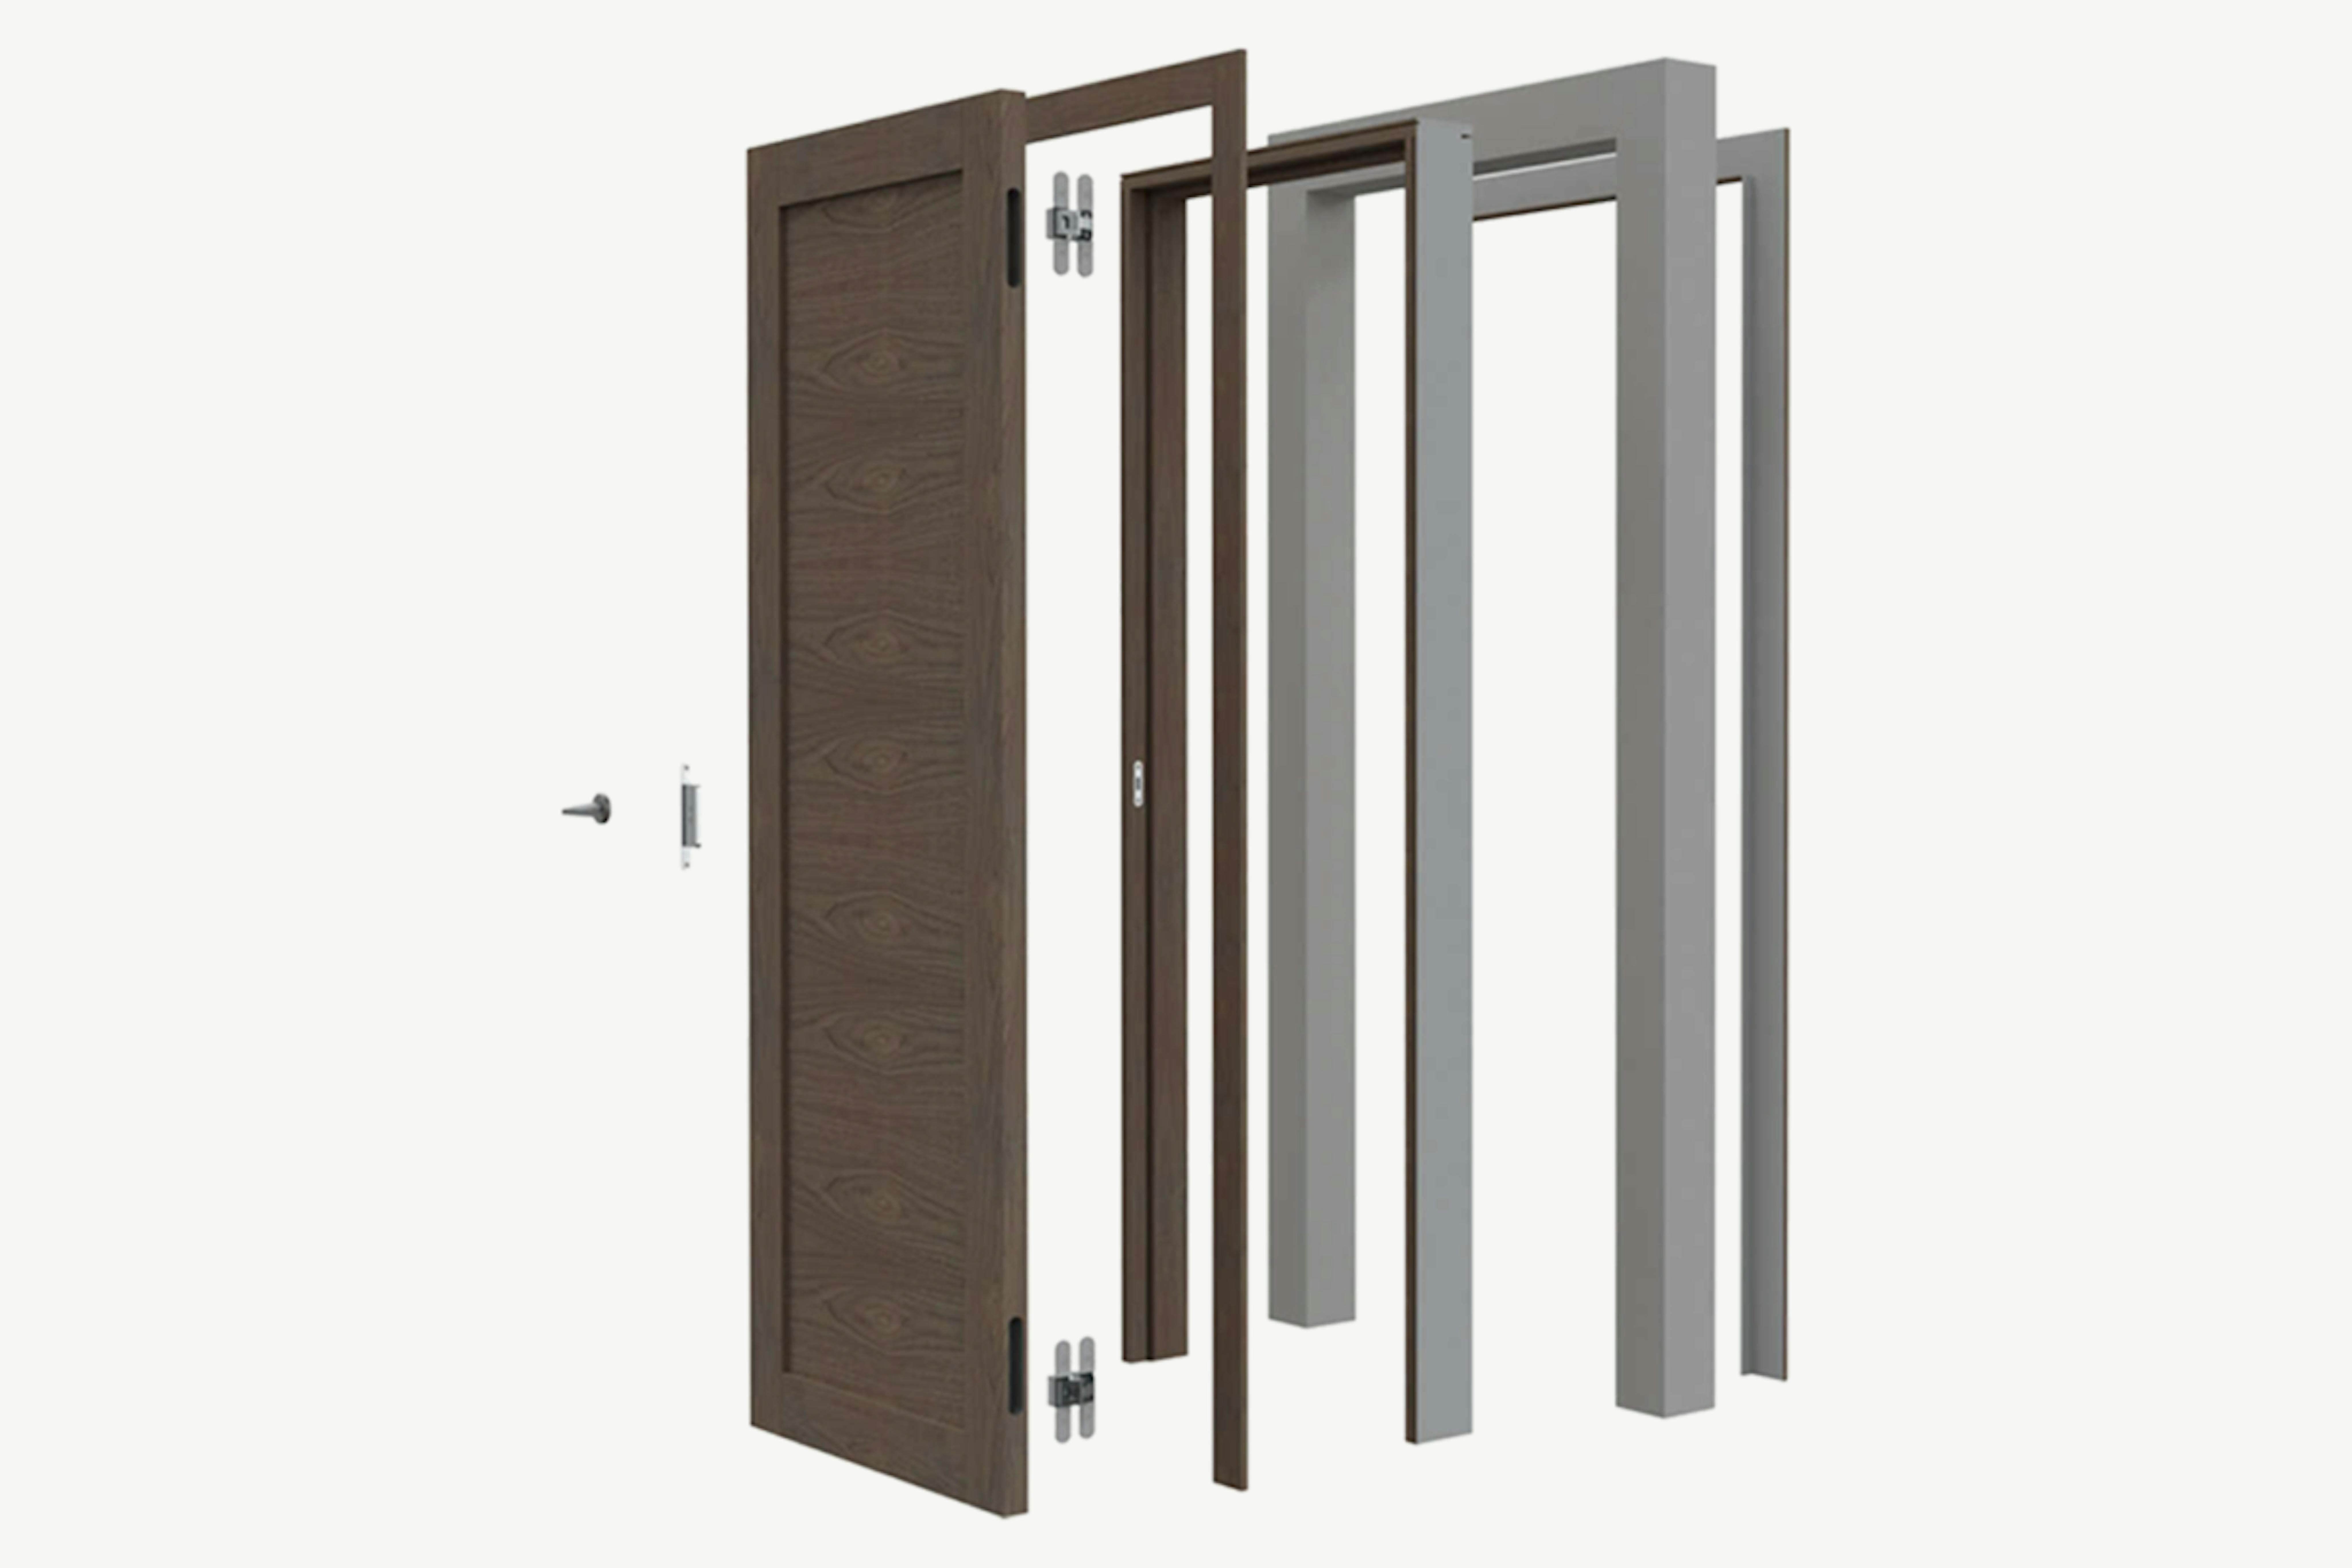 An illustration of all the different components a Deuren internal pre-hung door set is made up of.